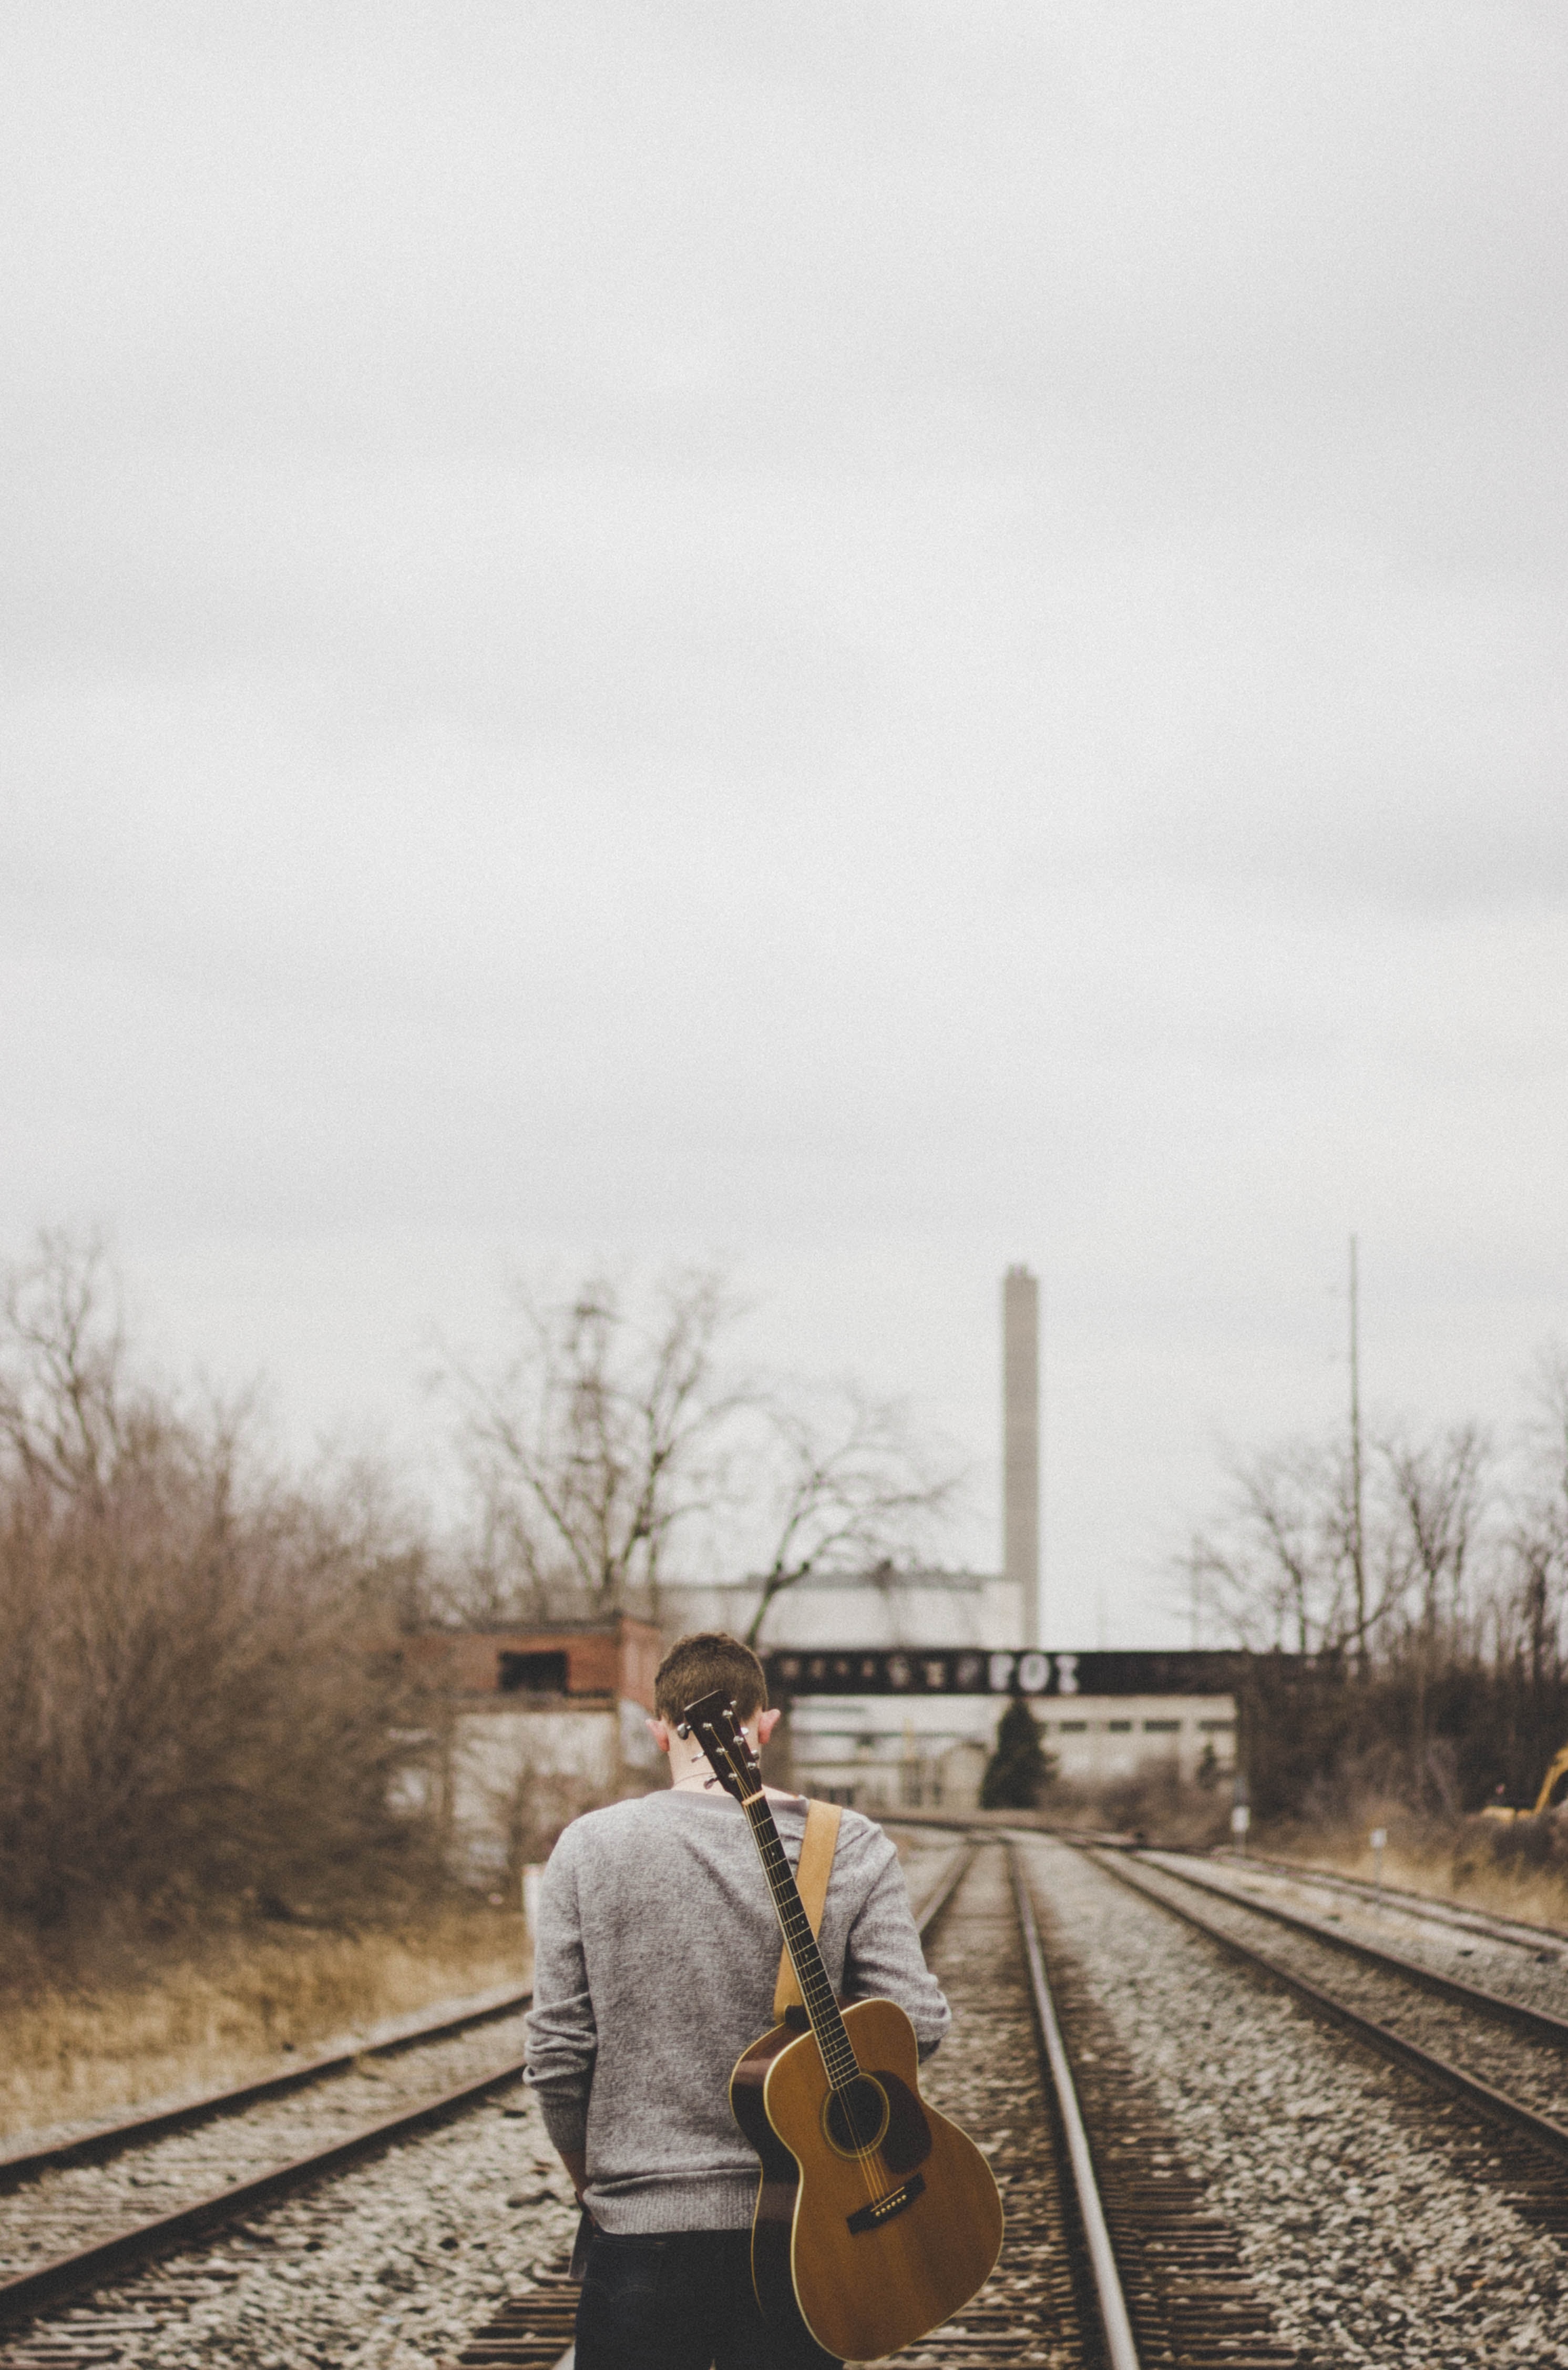 A man walking down a railroad with a guitar on his back.│ Source: Unsplash